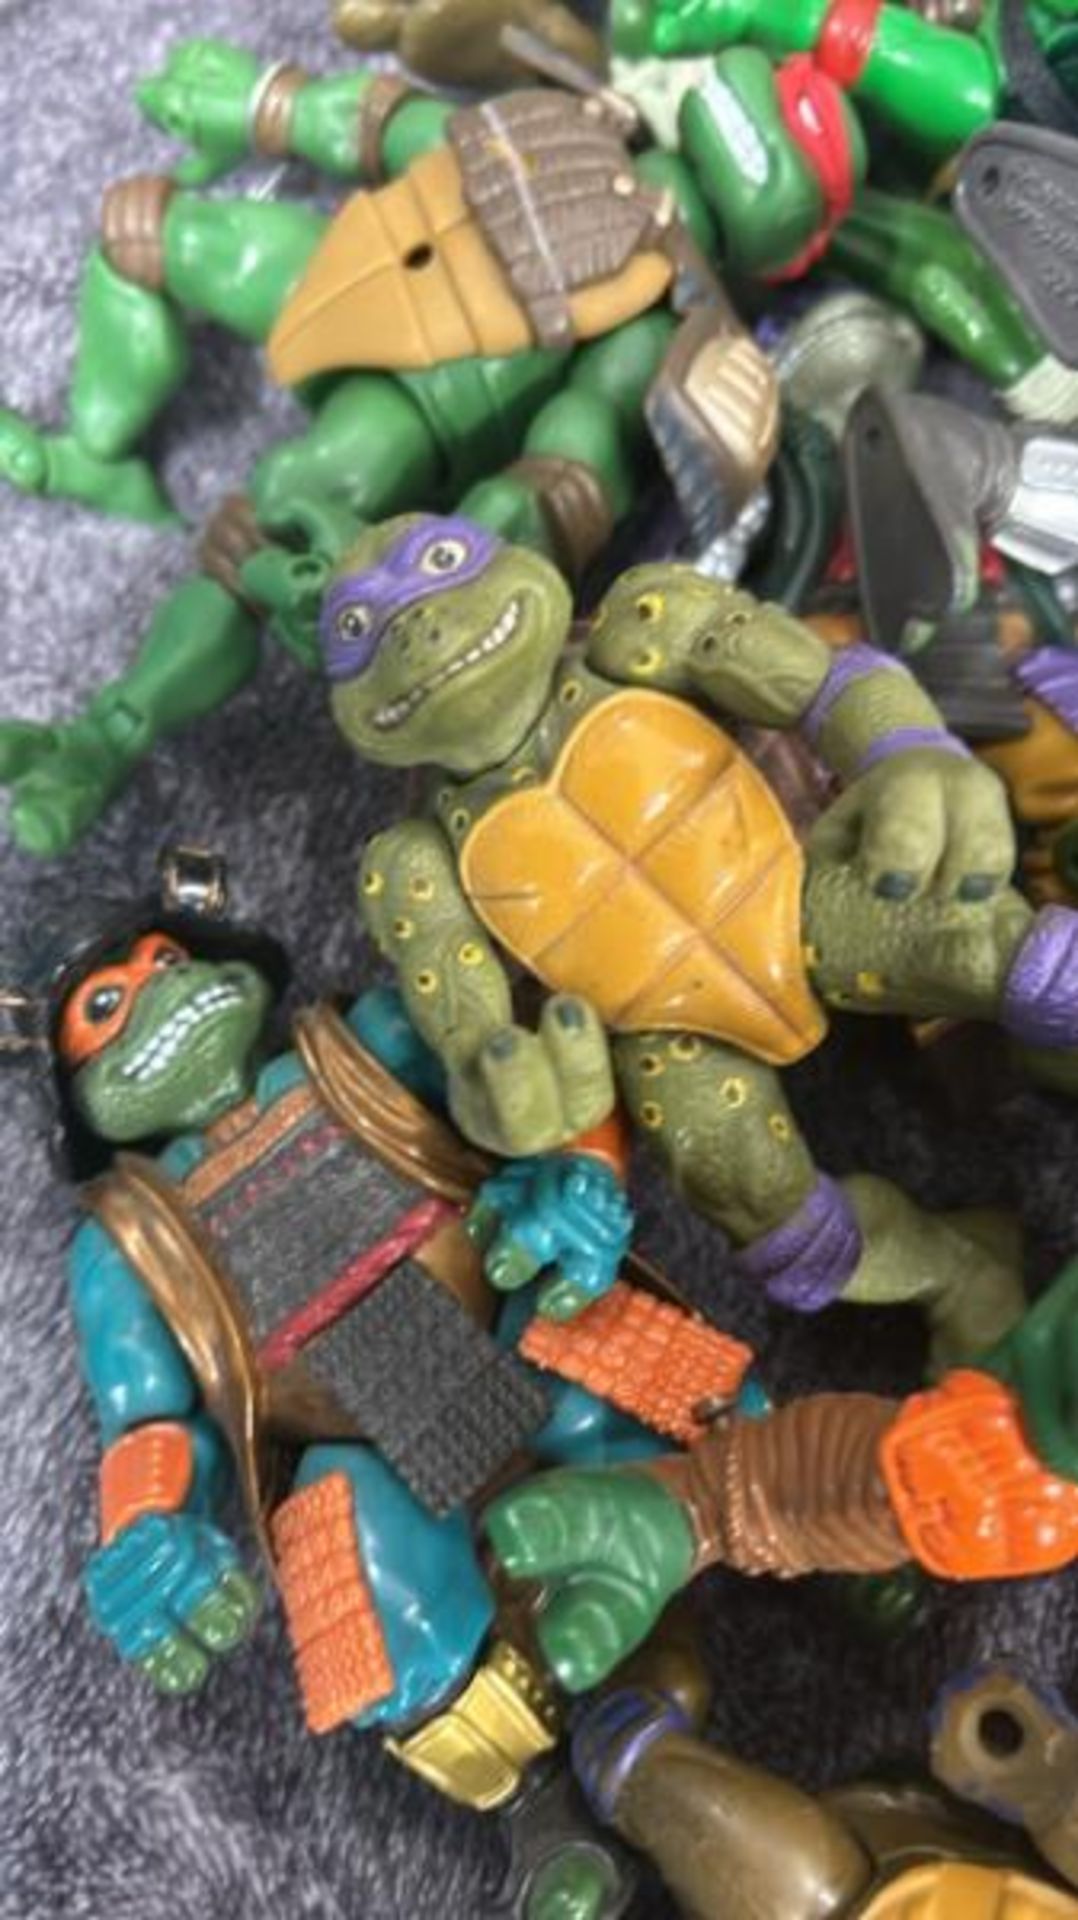 Teenage Mutant Ninja Turtles - Assorted loose figures including some based on the movie versions and - Image 2 of 13